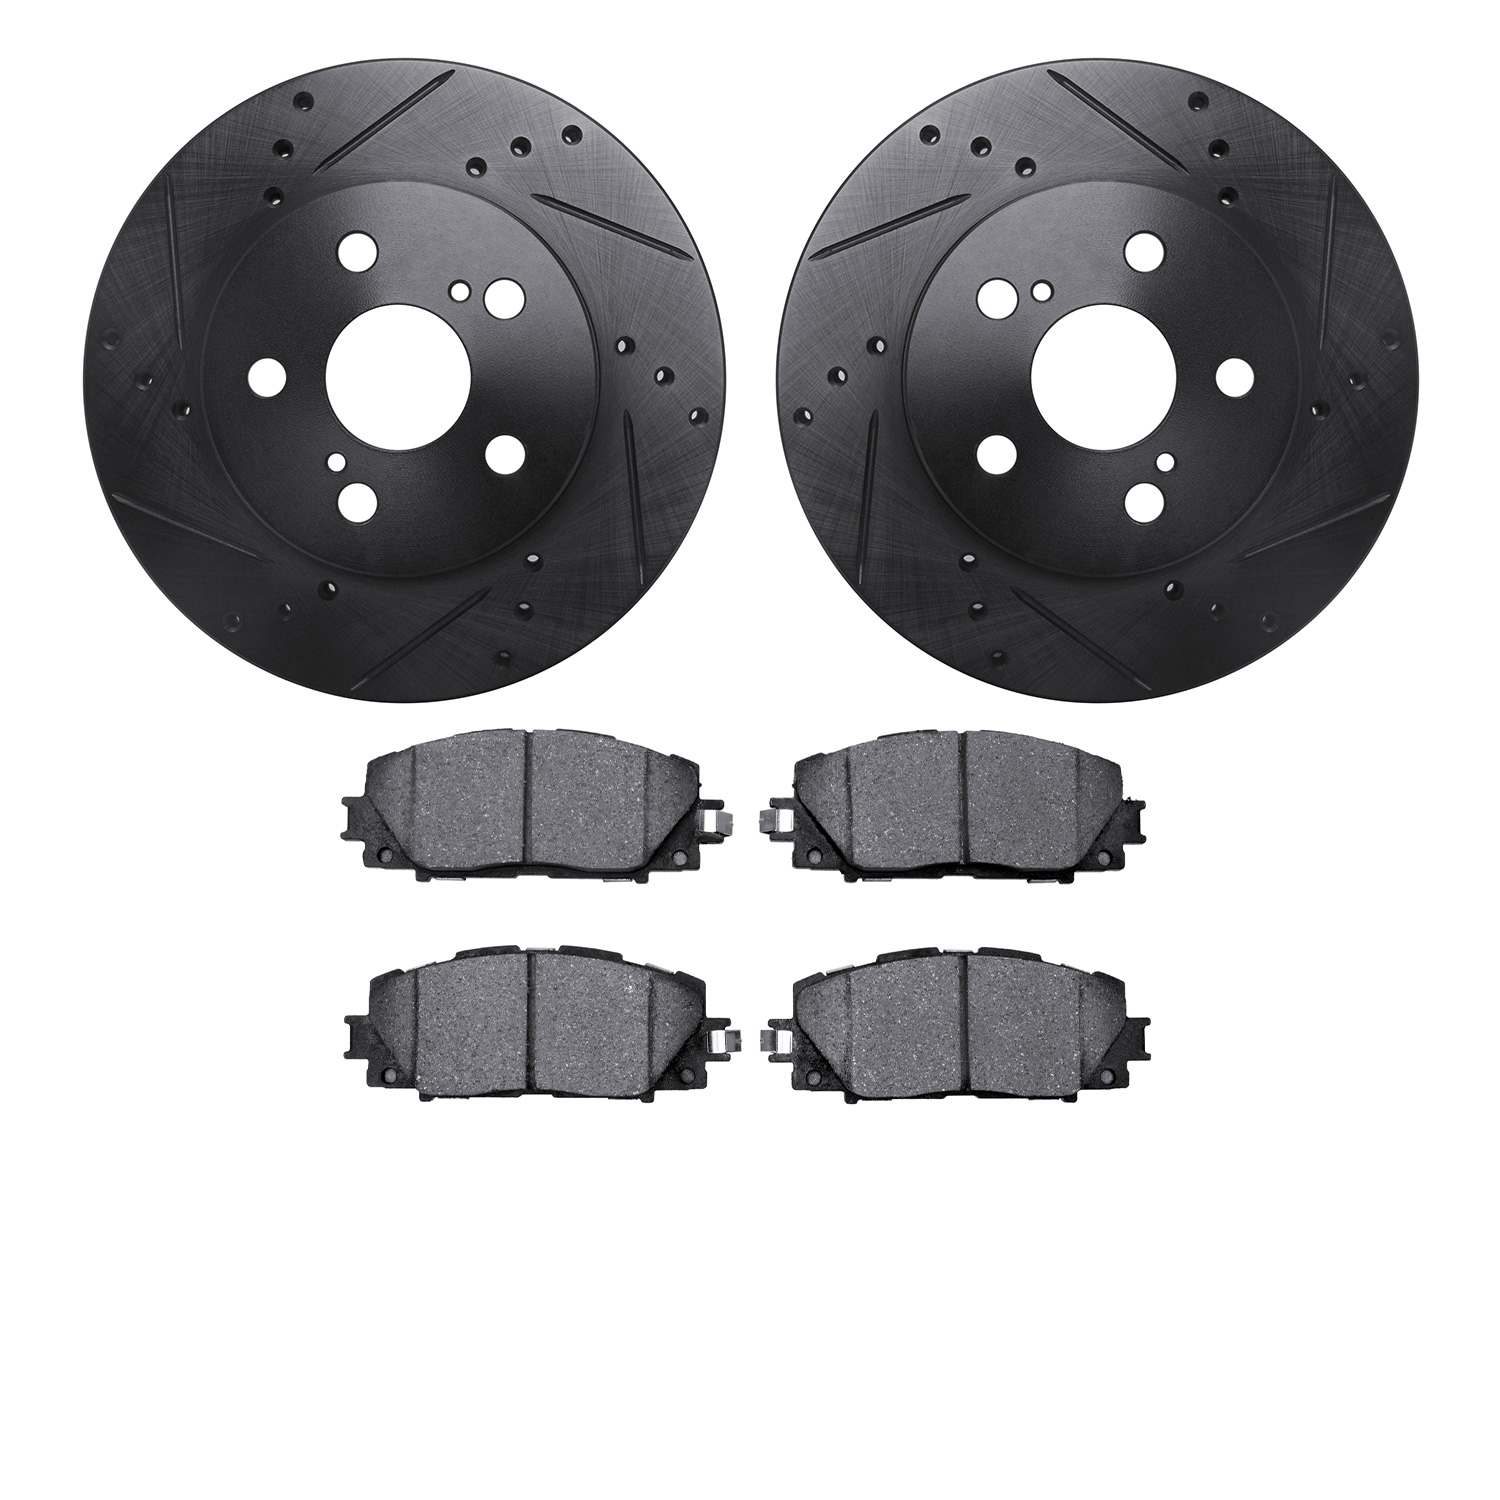 8302-76156 Drilled/Slotted Brake Rotors with 3000-Series Ceramic Brake Pads Kit [Black], Fits Select Lexus/Toyota/Scion, Positio